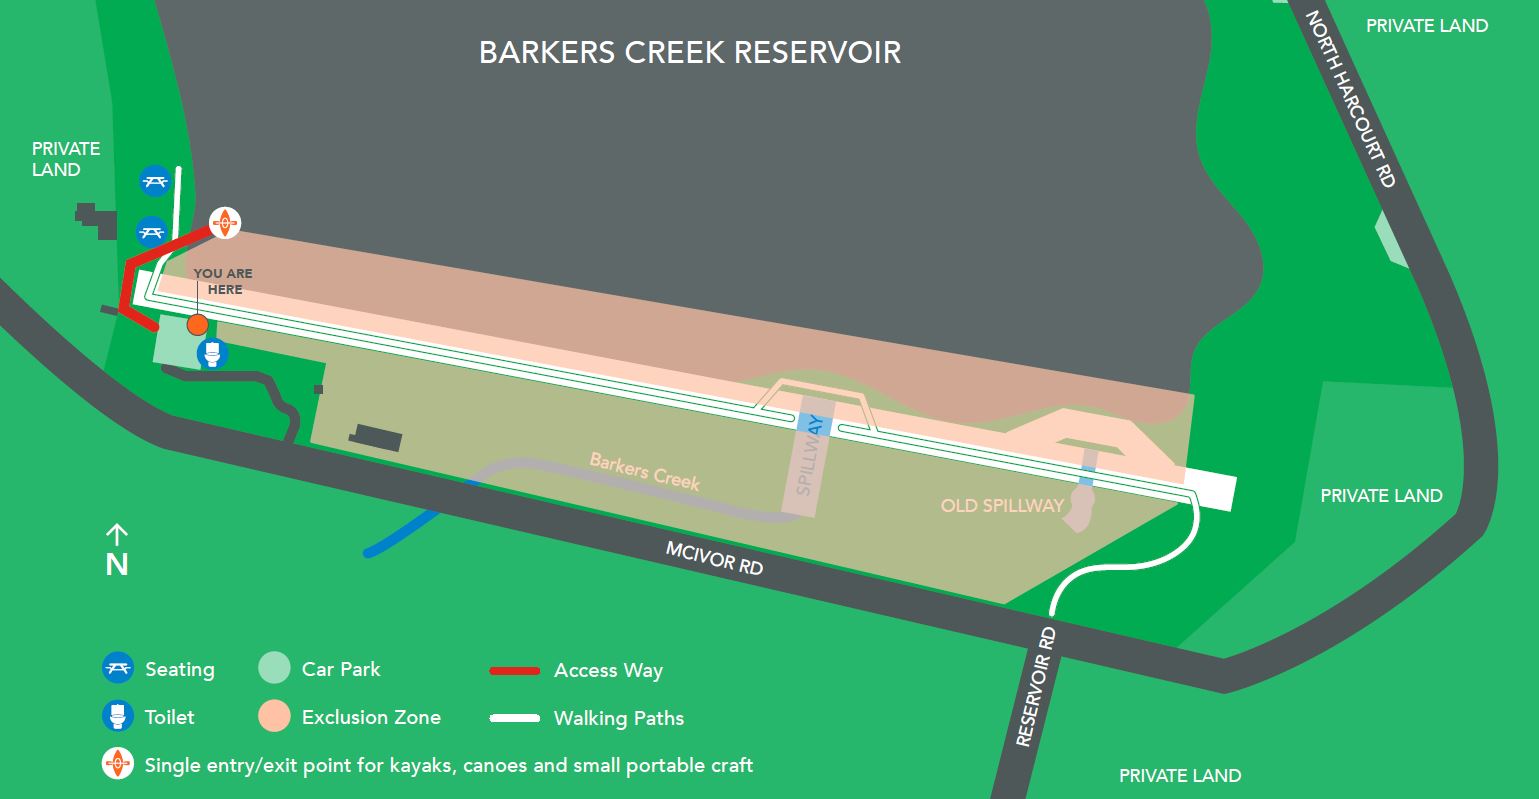 Map Of Barkers Creek With Facilities And On Water Access Points.JPG